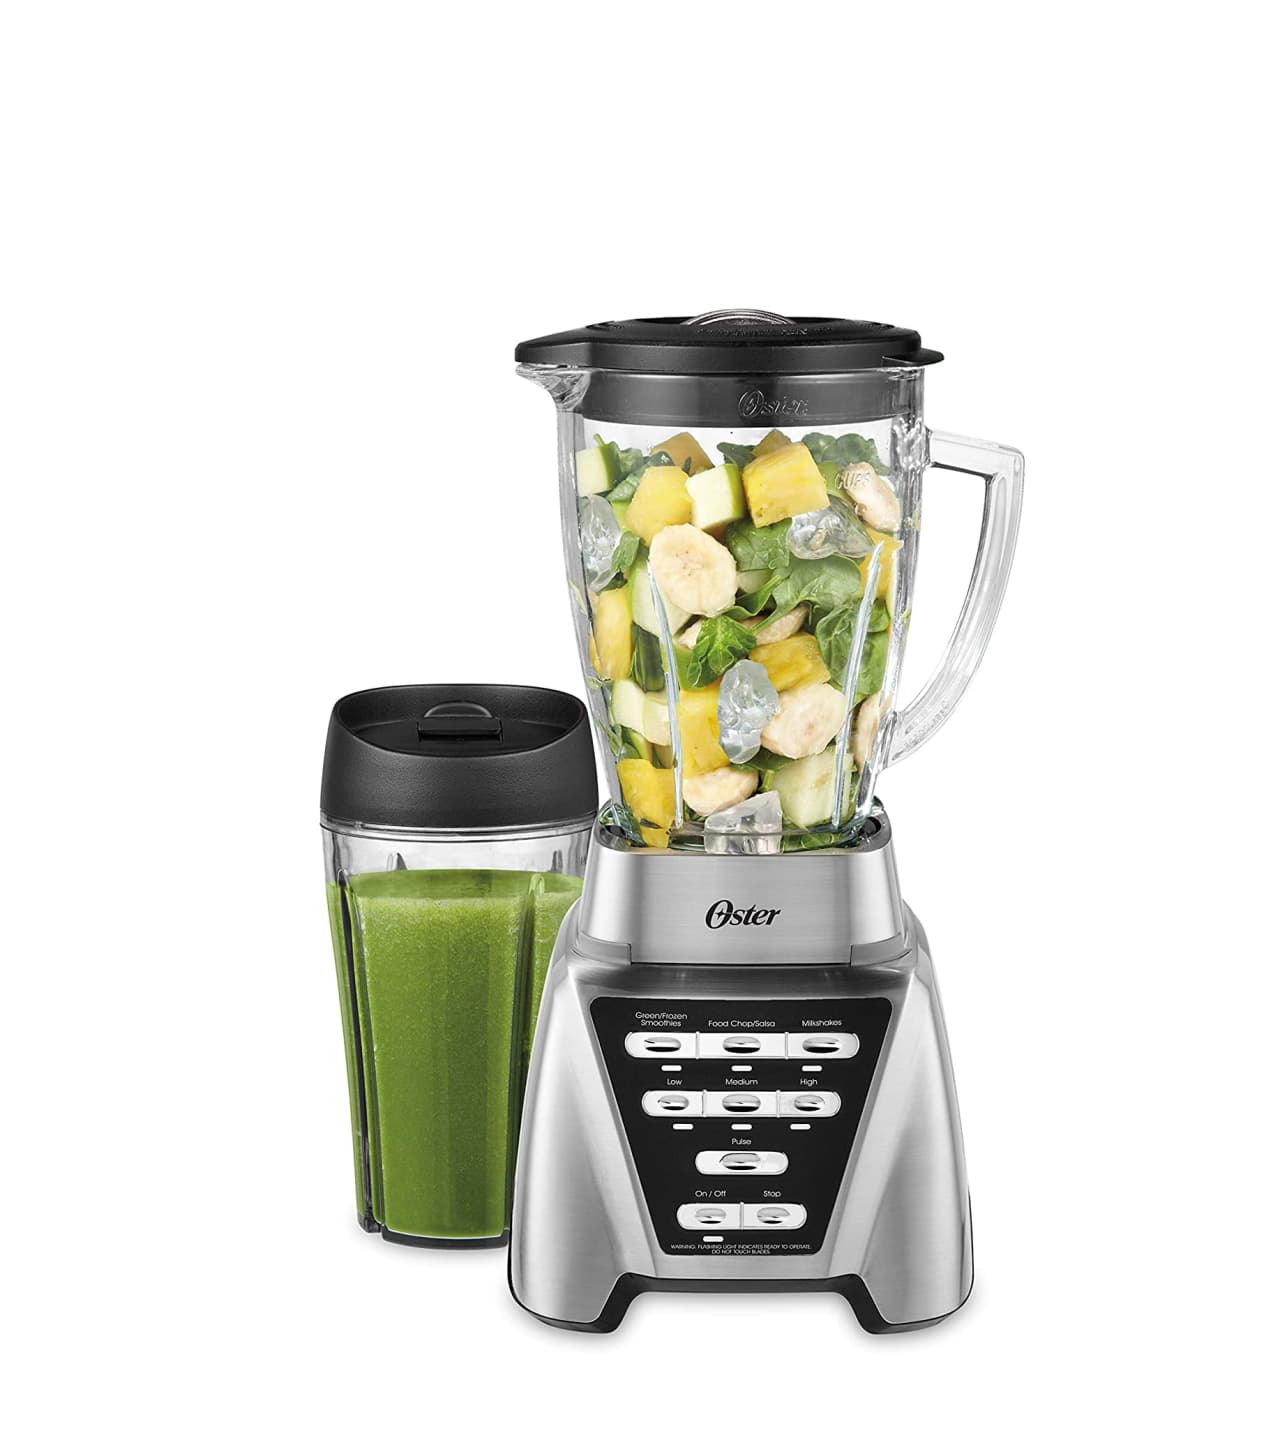 13 Best Blenders for All Your Smoothies, Soups, and Sauces